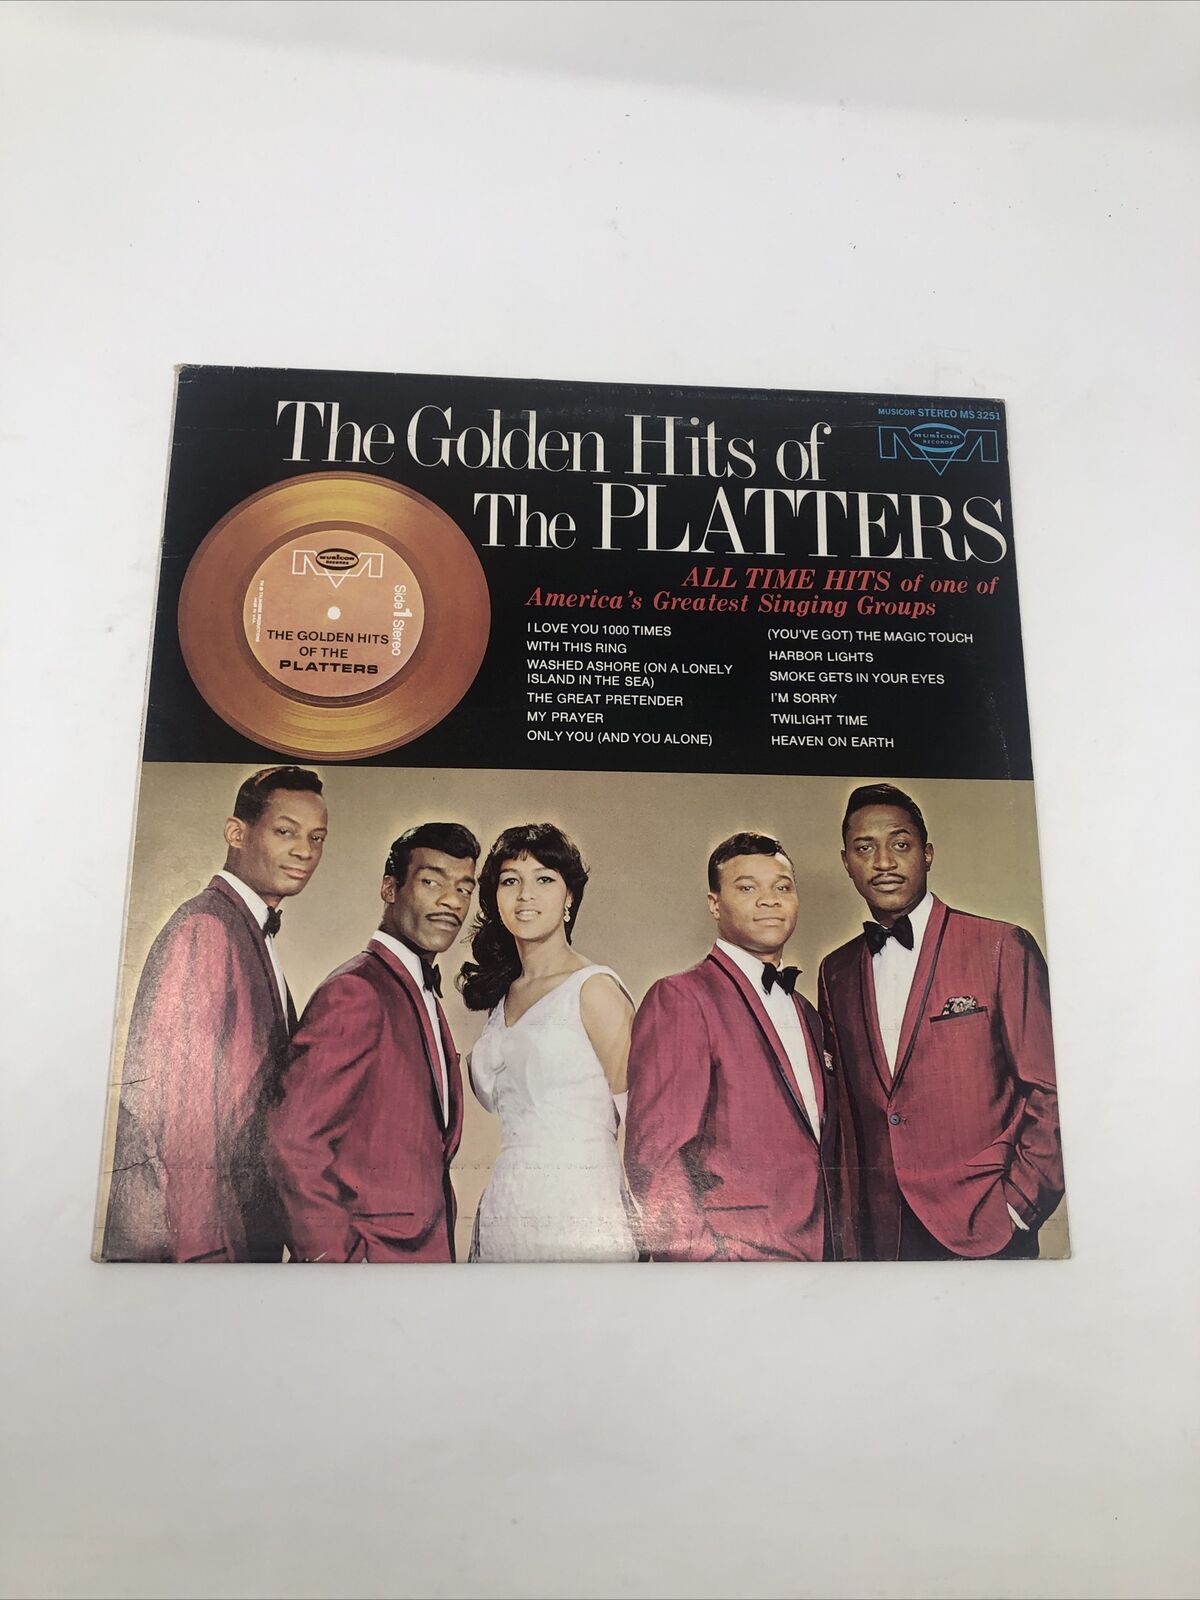 The Platters – The Golden Hits Of The Platters - (1973, Vinyl)